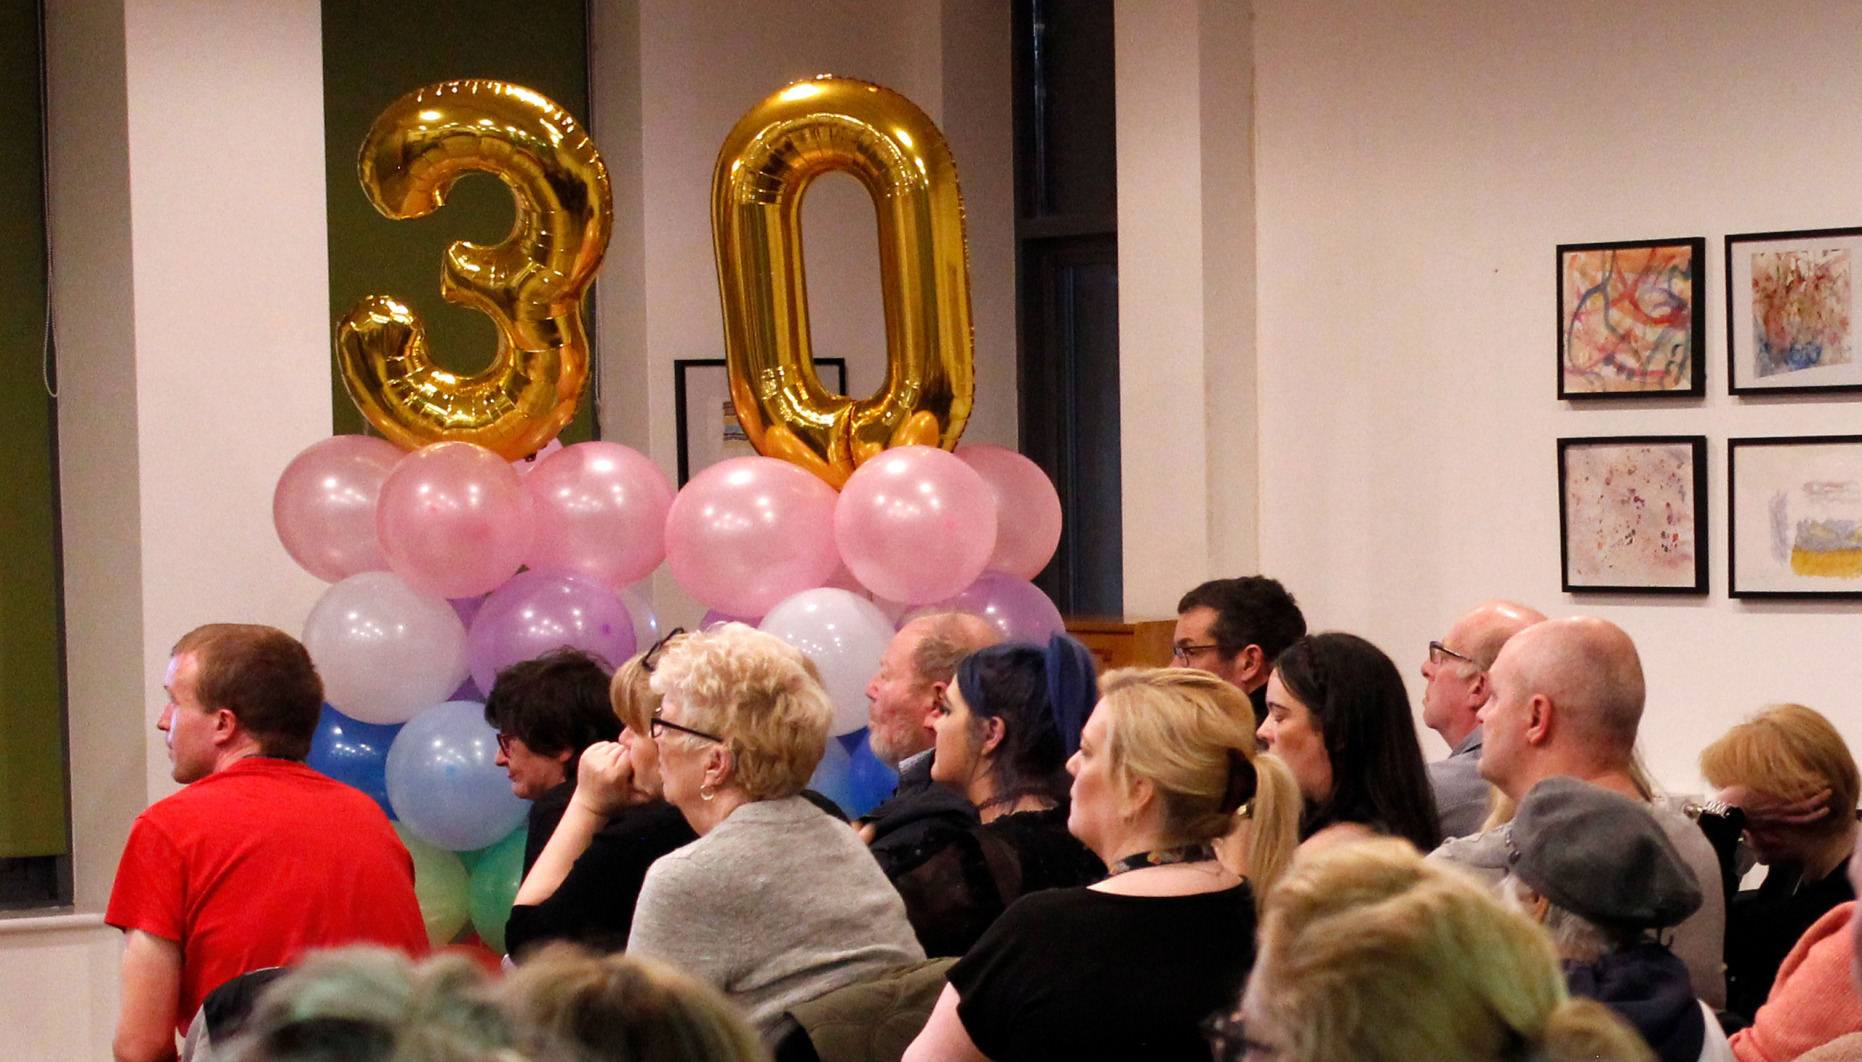 An audience with the number thirty made from baloons behind them